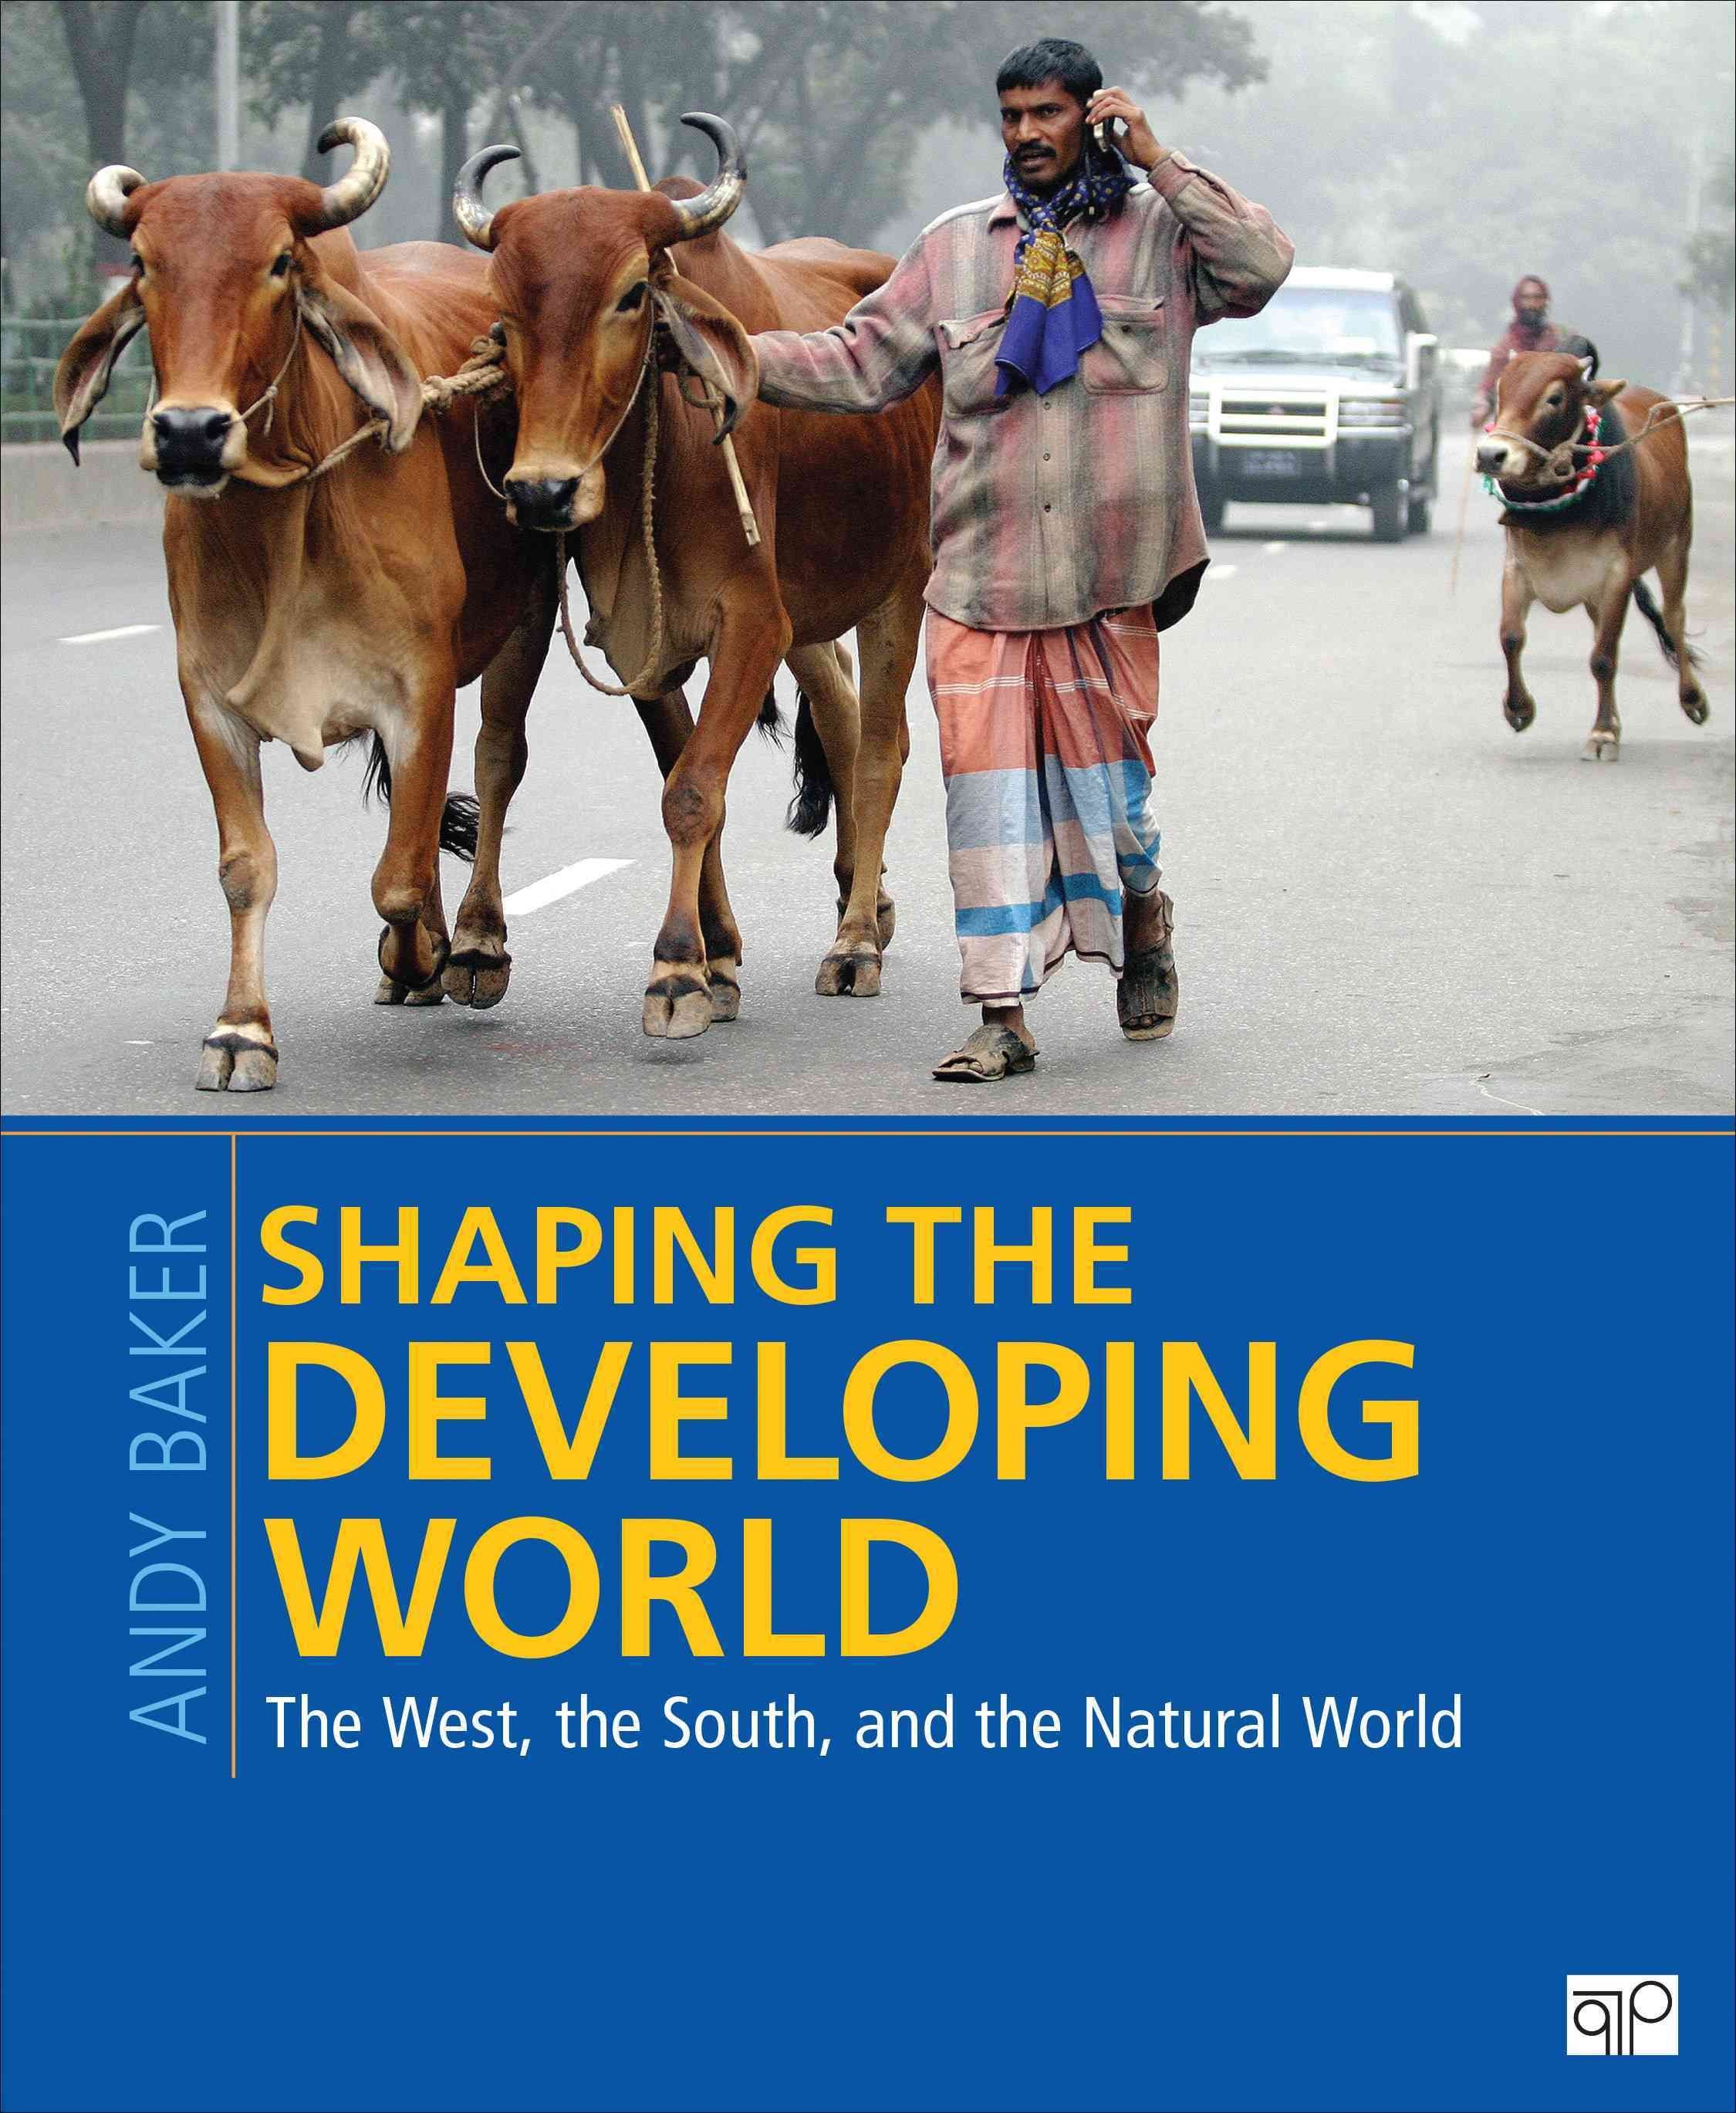 Shaping the Developing World